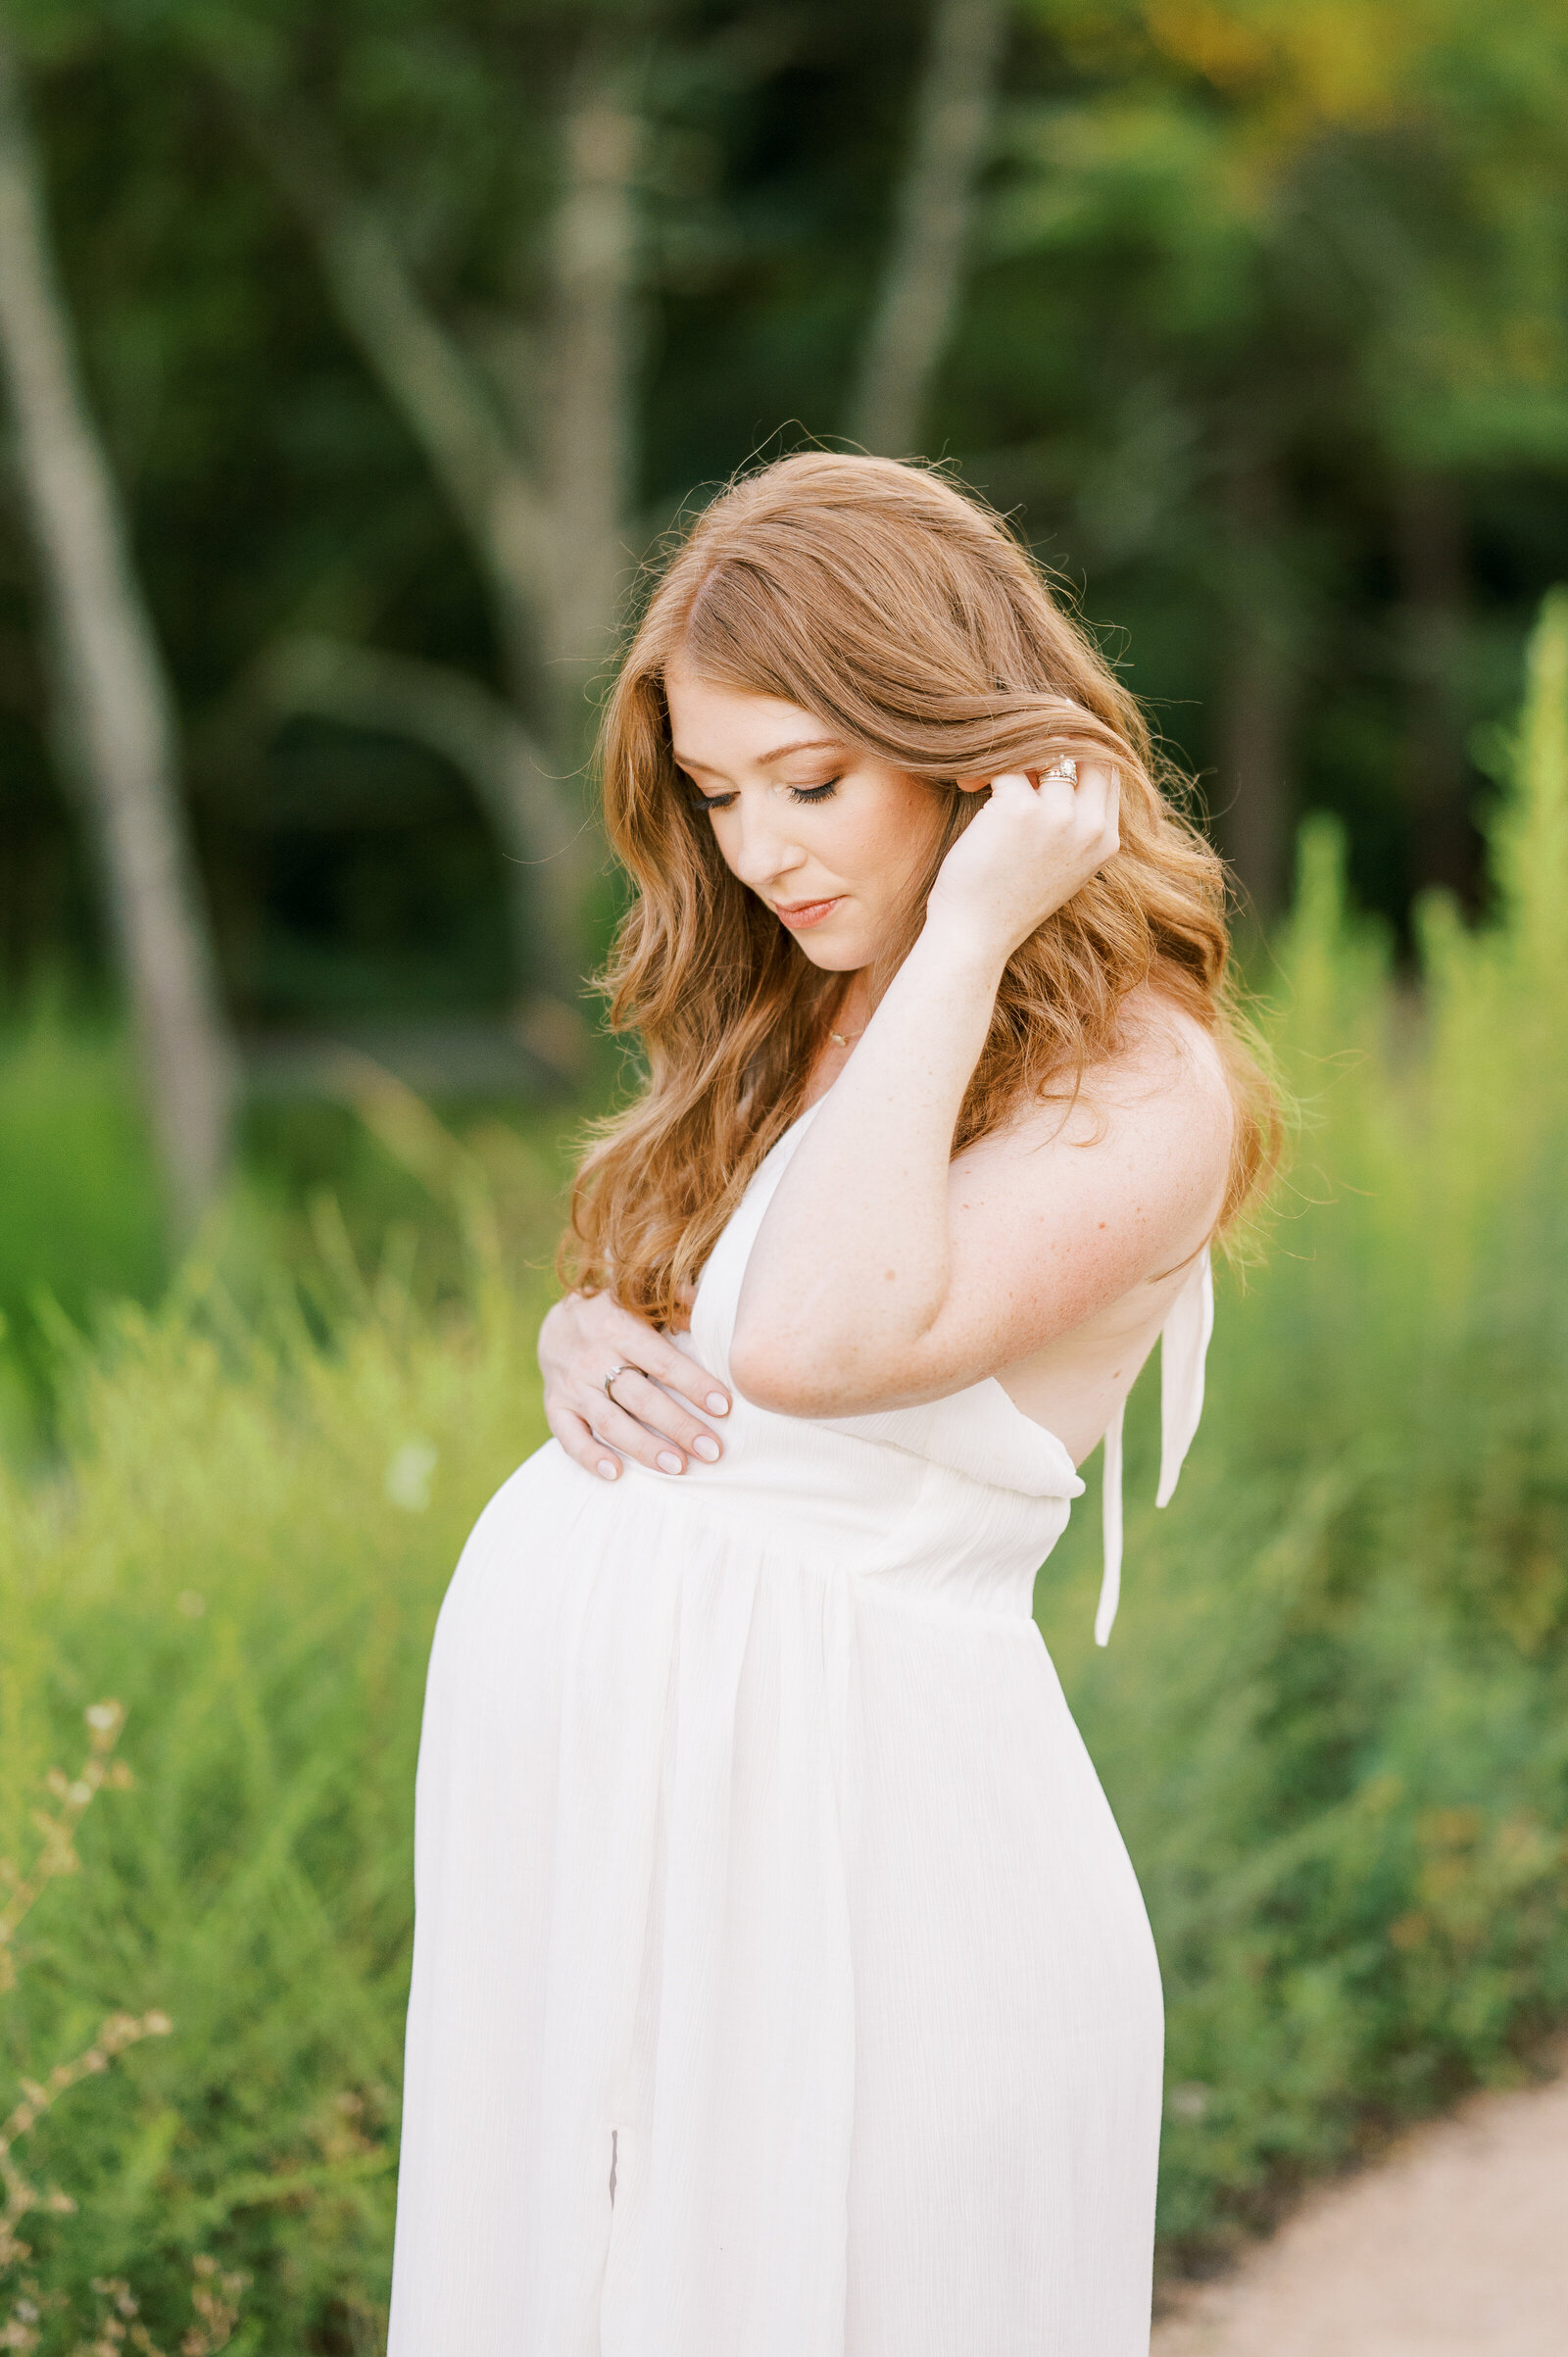 Expecting mom in white dress pulls hair back during maternity photoshoot